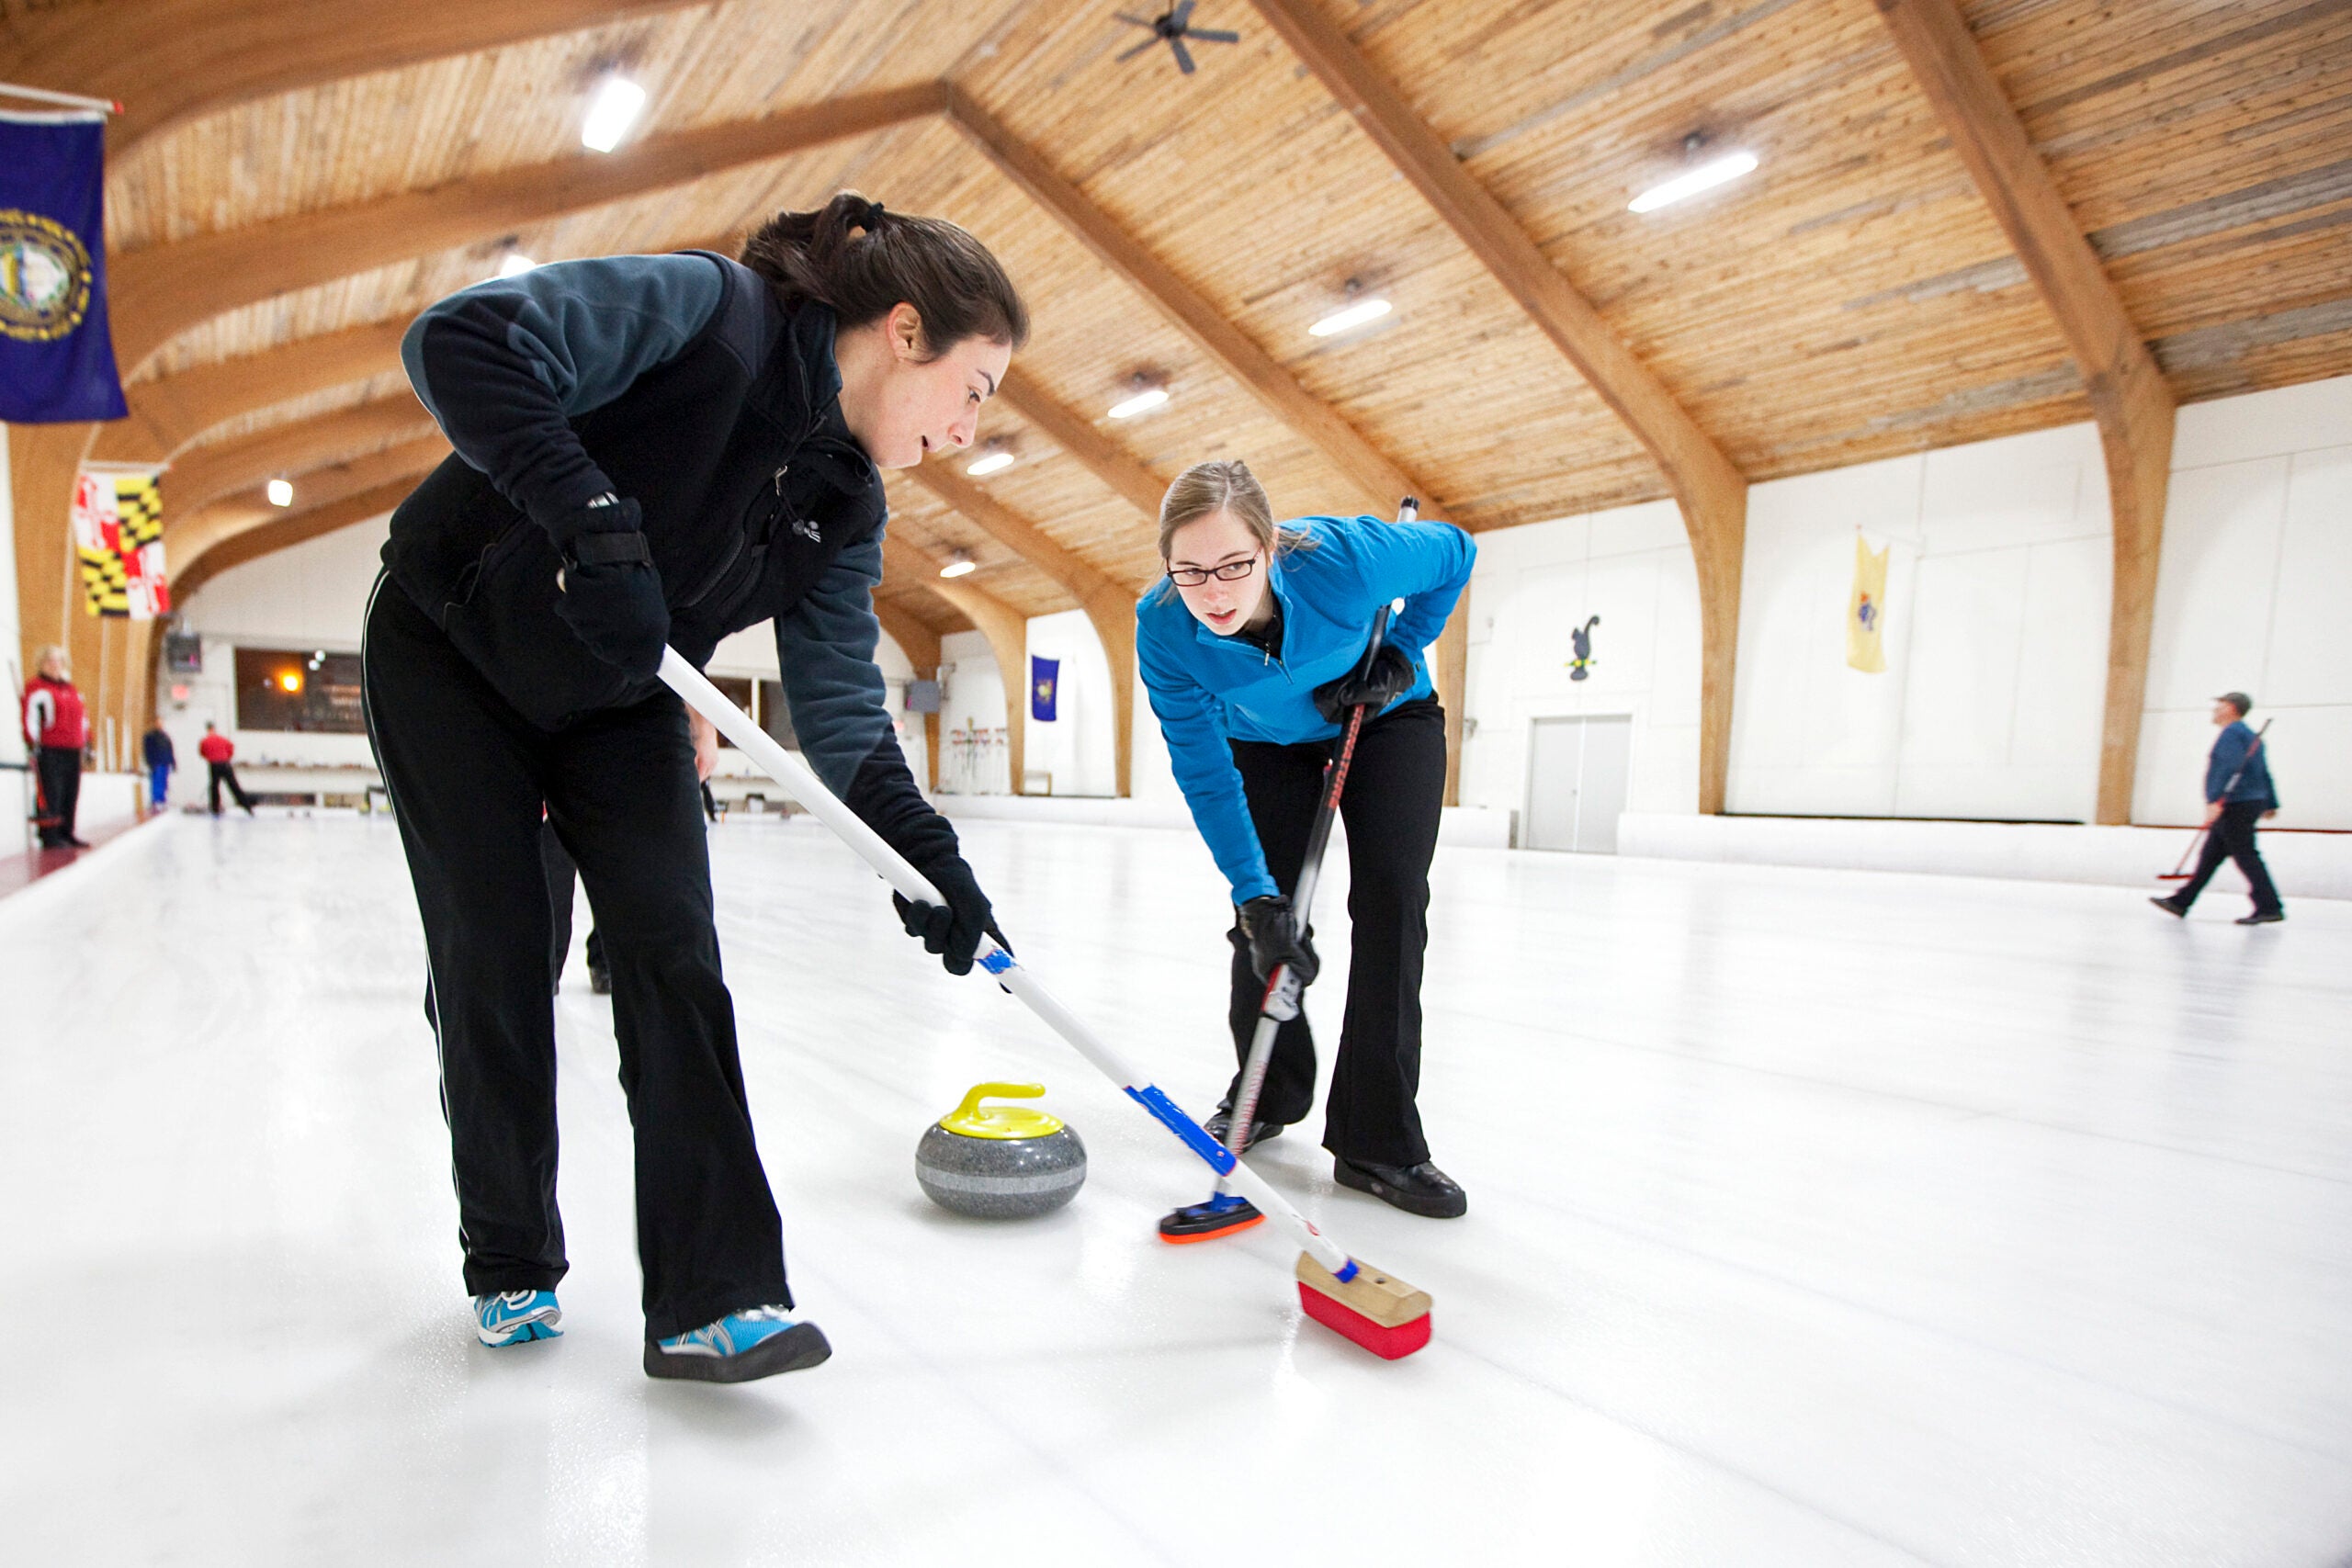 You can learn to curl with these Massachusetts curling clubs